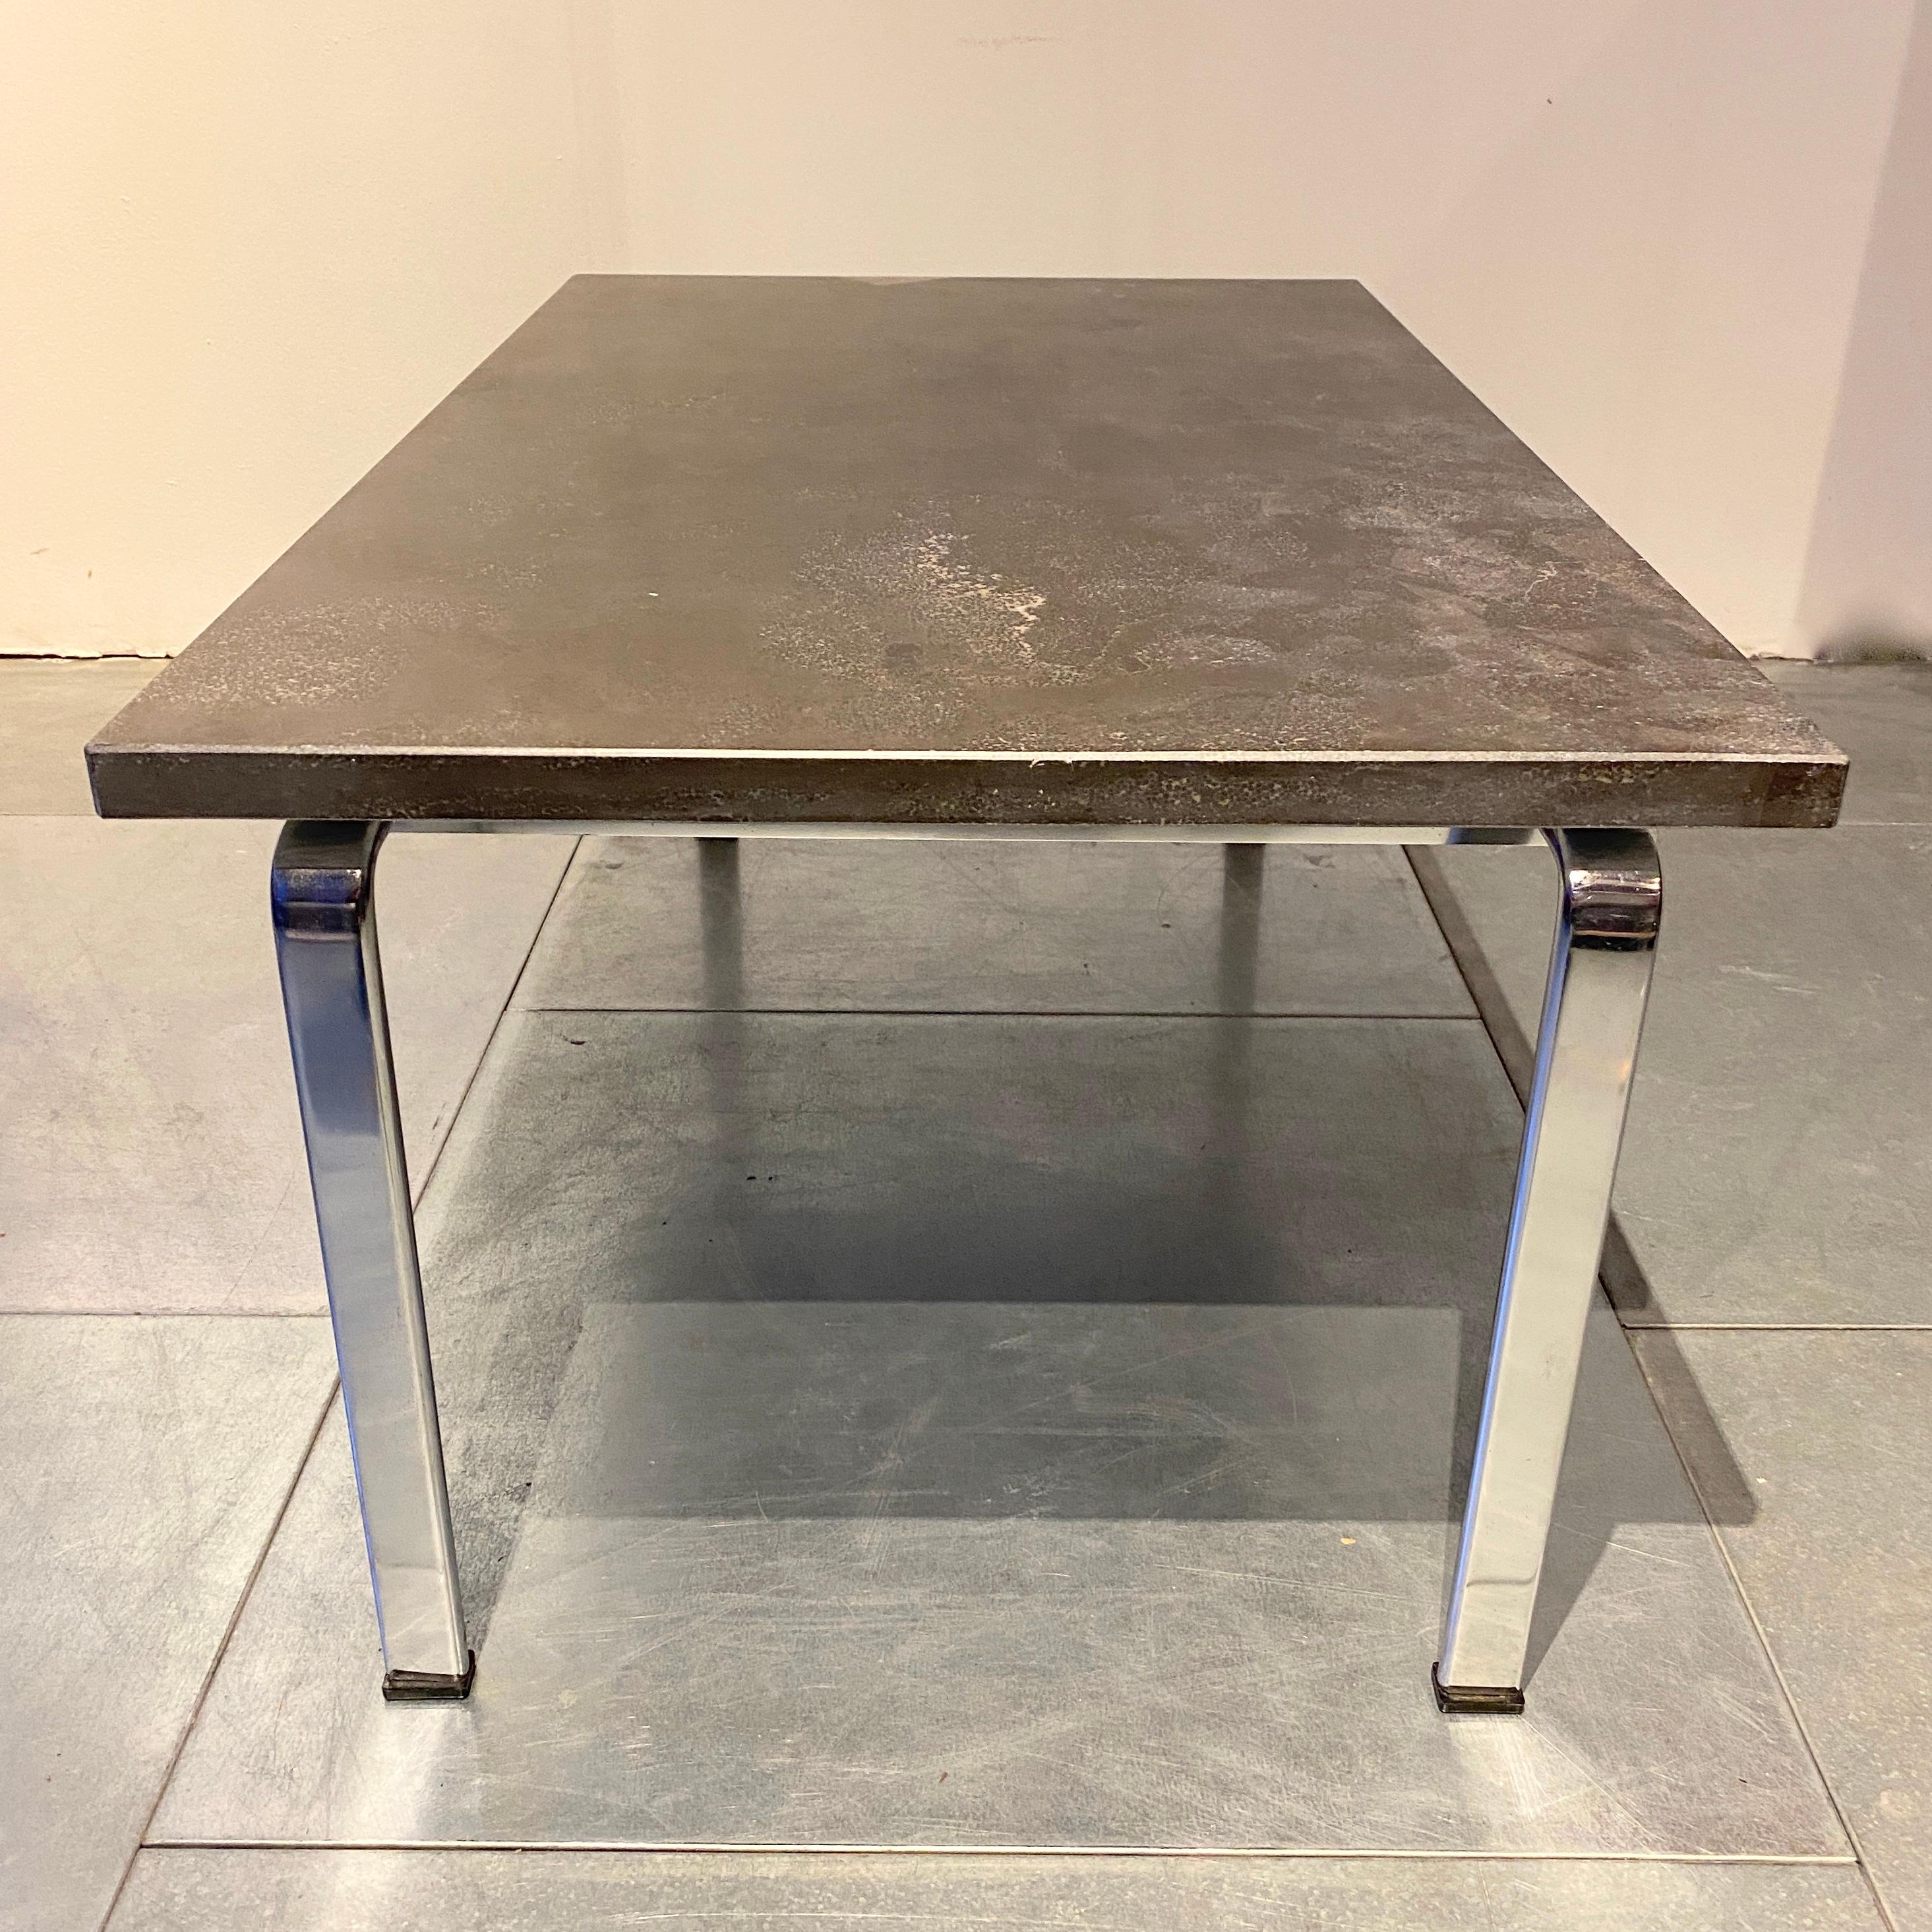 Fabricius & Kastholm FK 90 table for Kill International - 1960
stone and iron chrome feet.